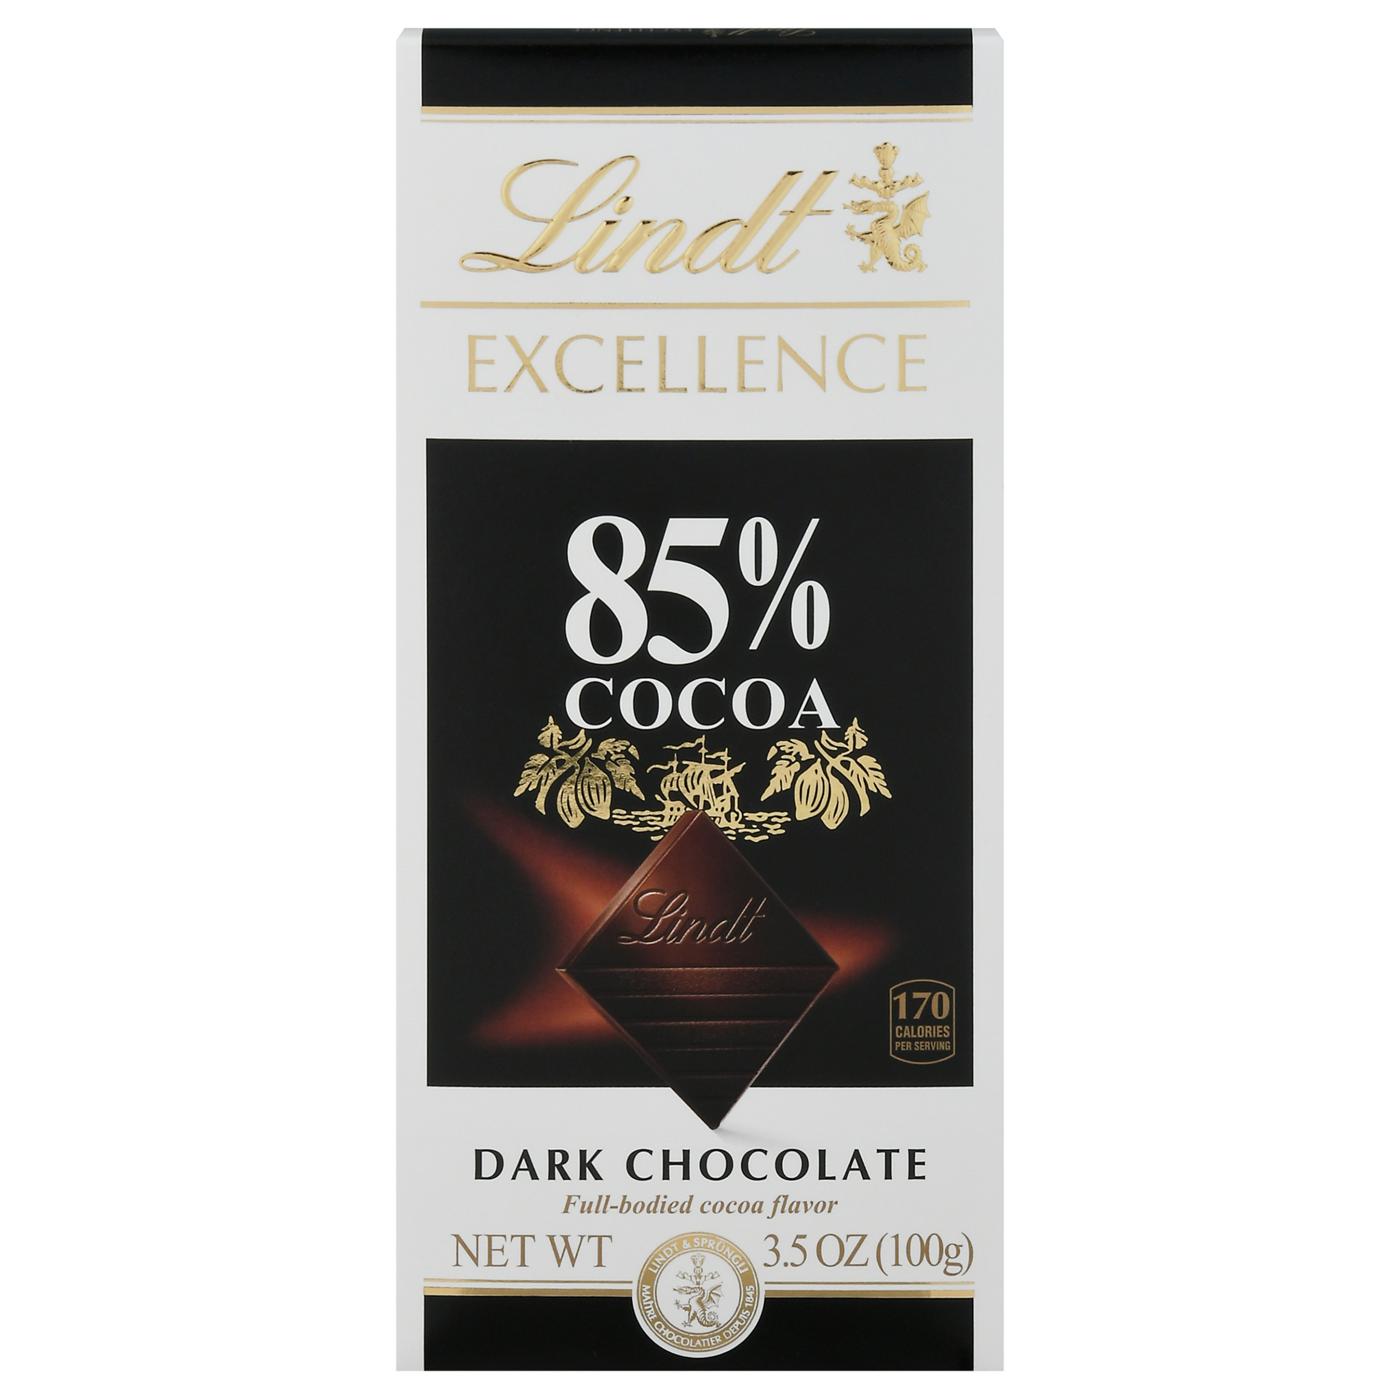 Lindt Excellence 85% Cocoa Dark Chocolate Bar; image 1 of 2